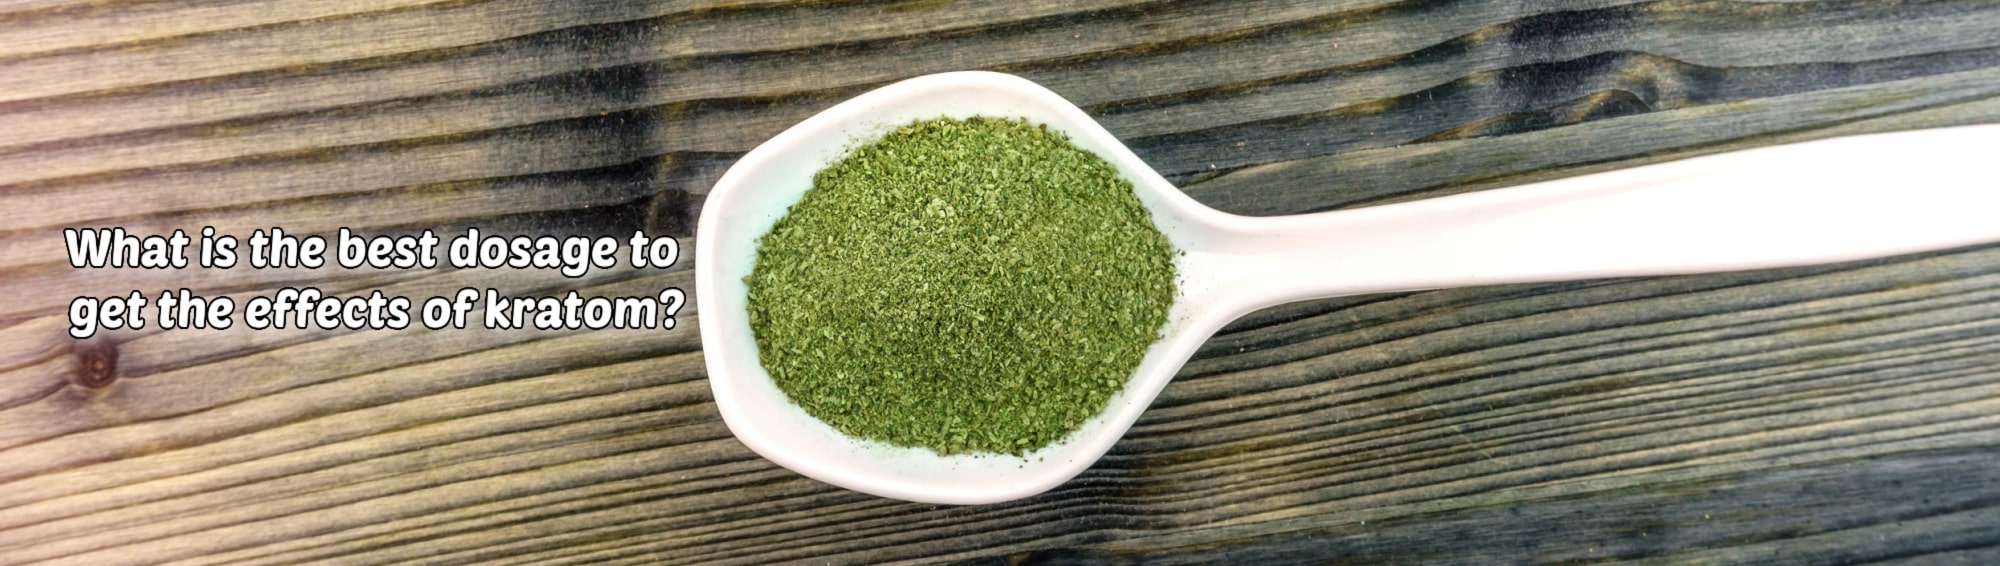 image of the best dosage to get the effects of kratom